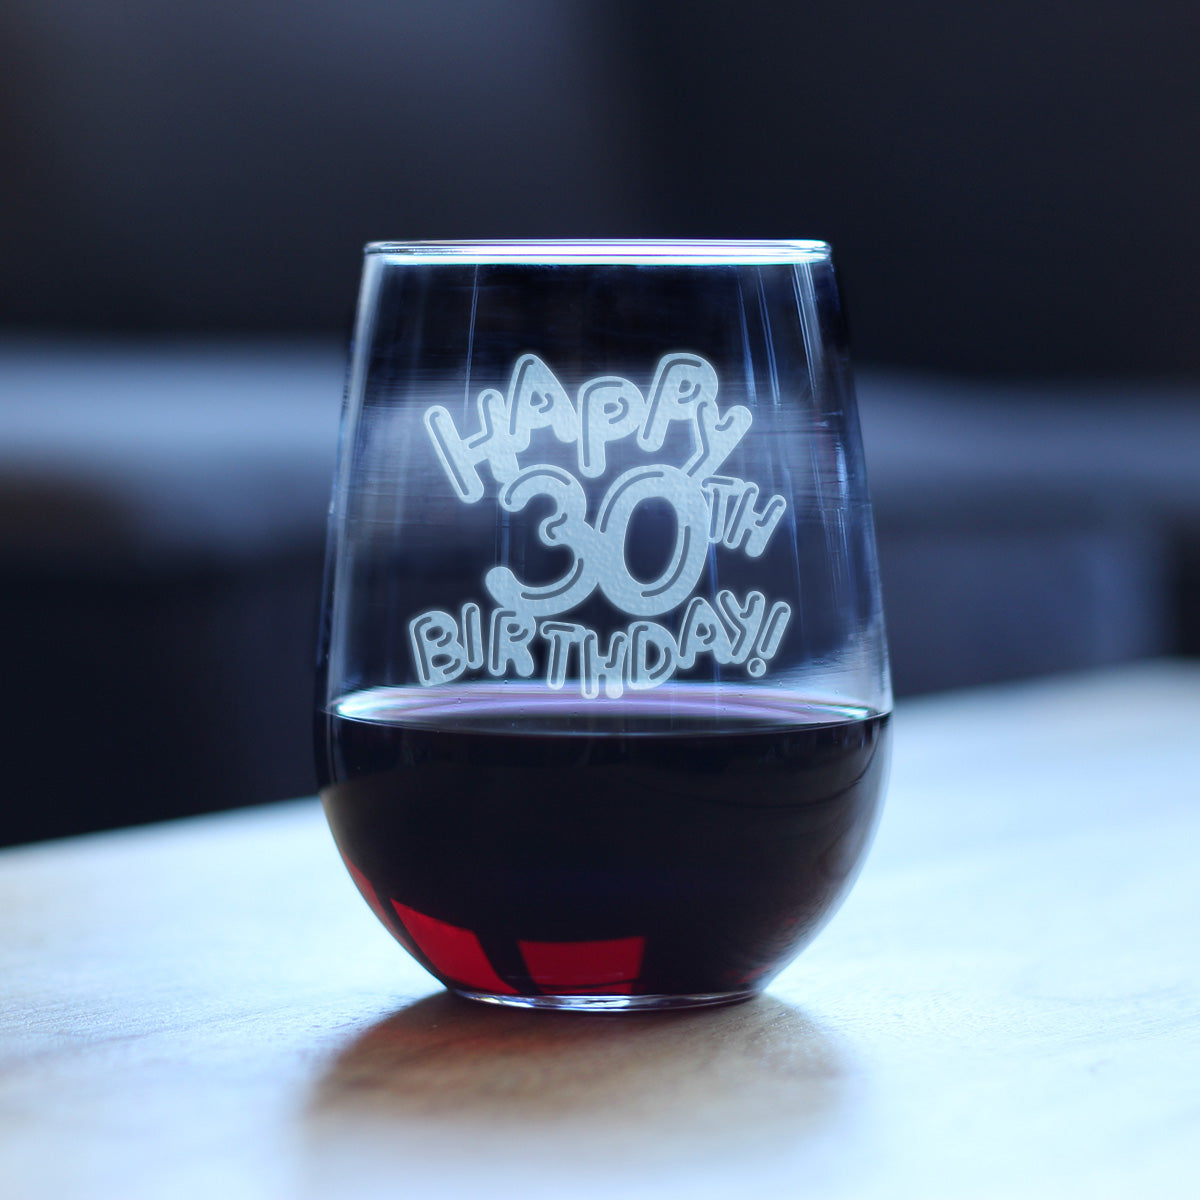 Happy 30th Birthday Balloons - Stemless Wine Glass Gifts for Women &amp; Men Turning 30 - Bday Party Decor - Large Glasses 17 Oz